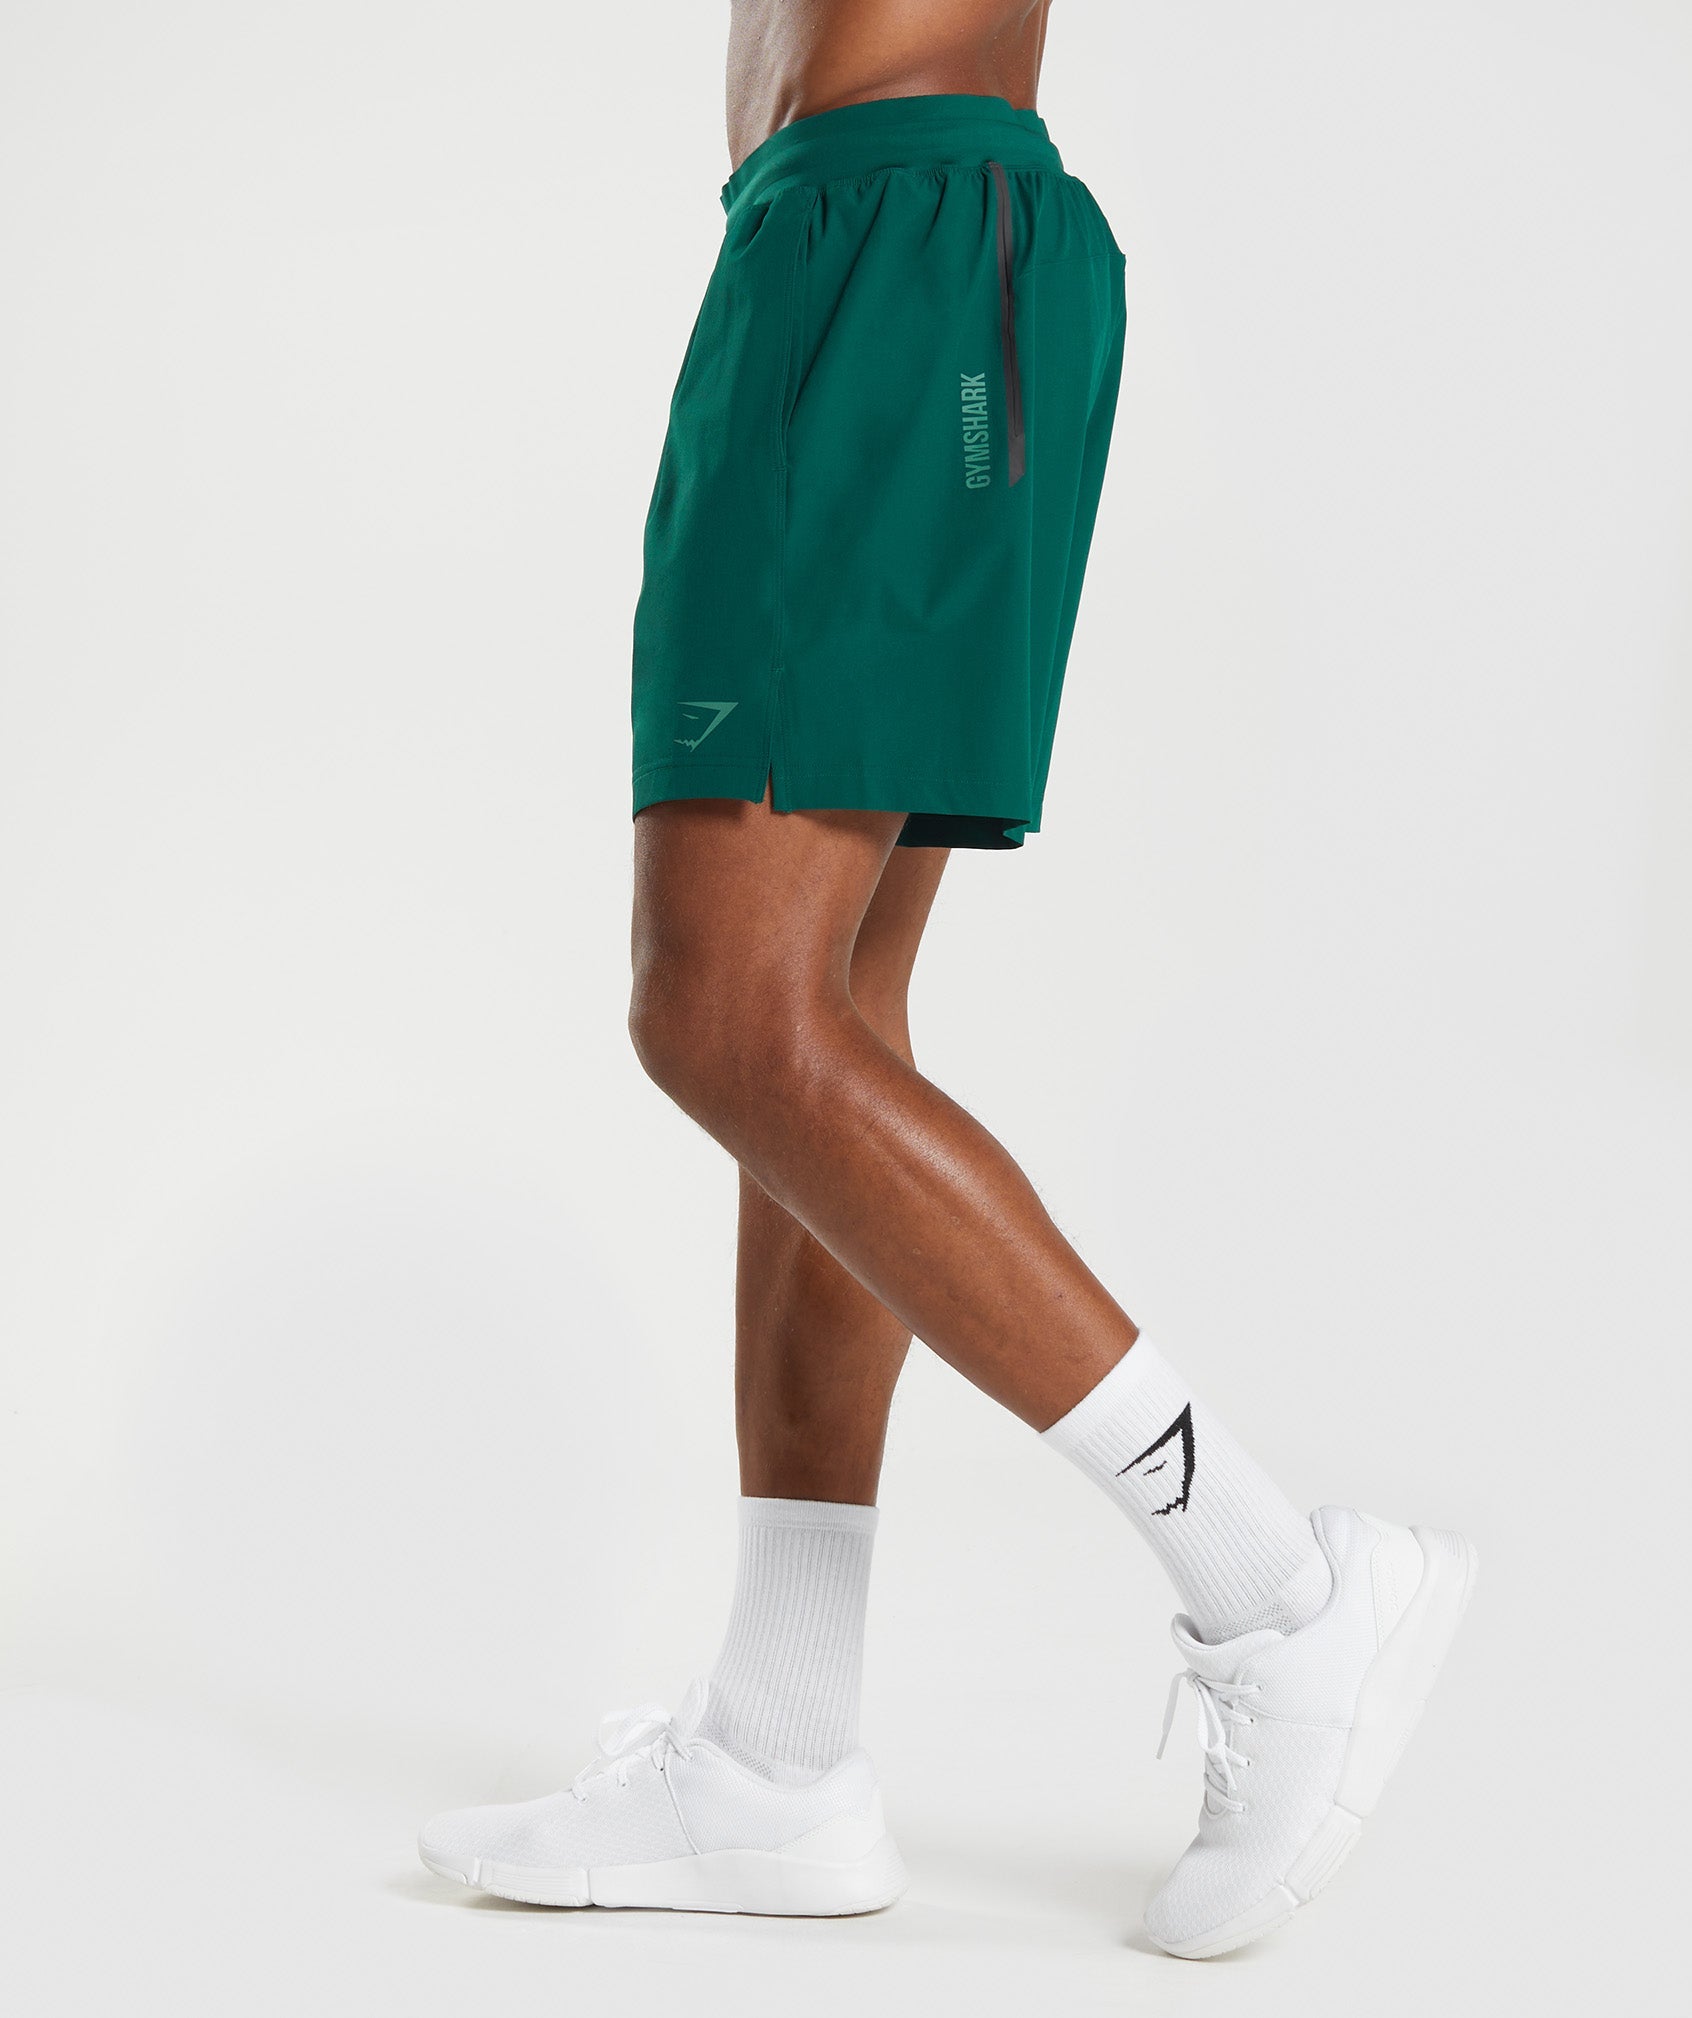 Apex 8" Function Shorts in Woodland Green - view 3